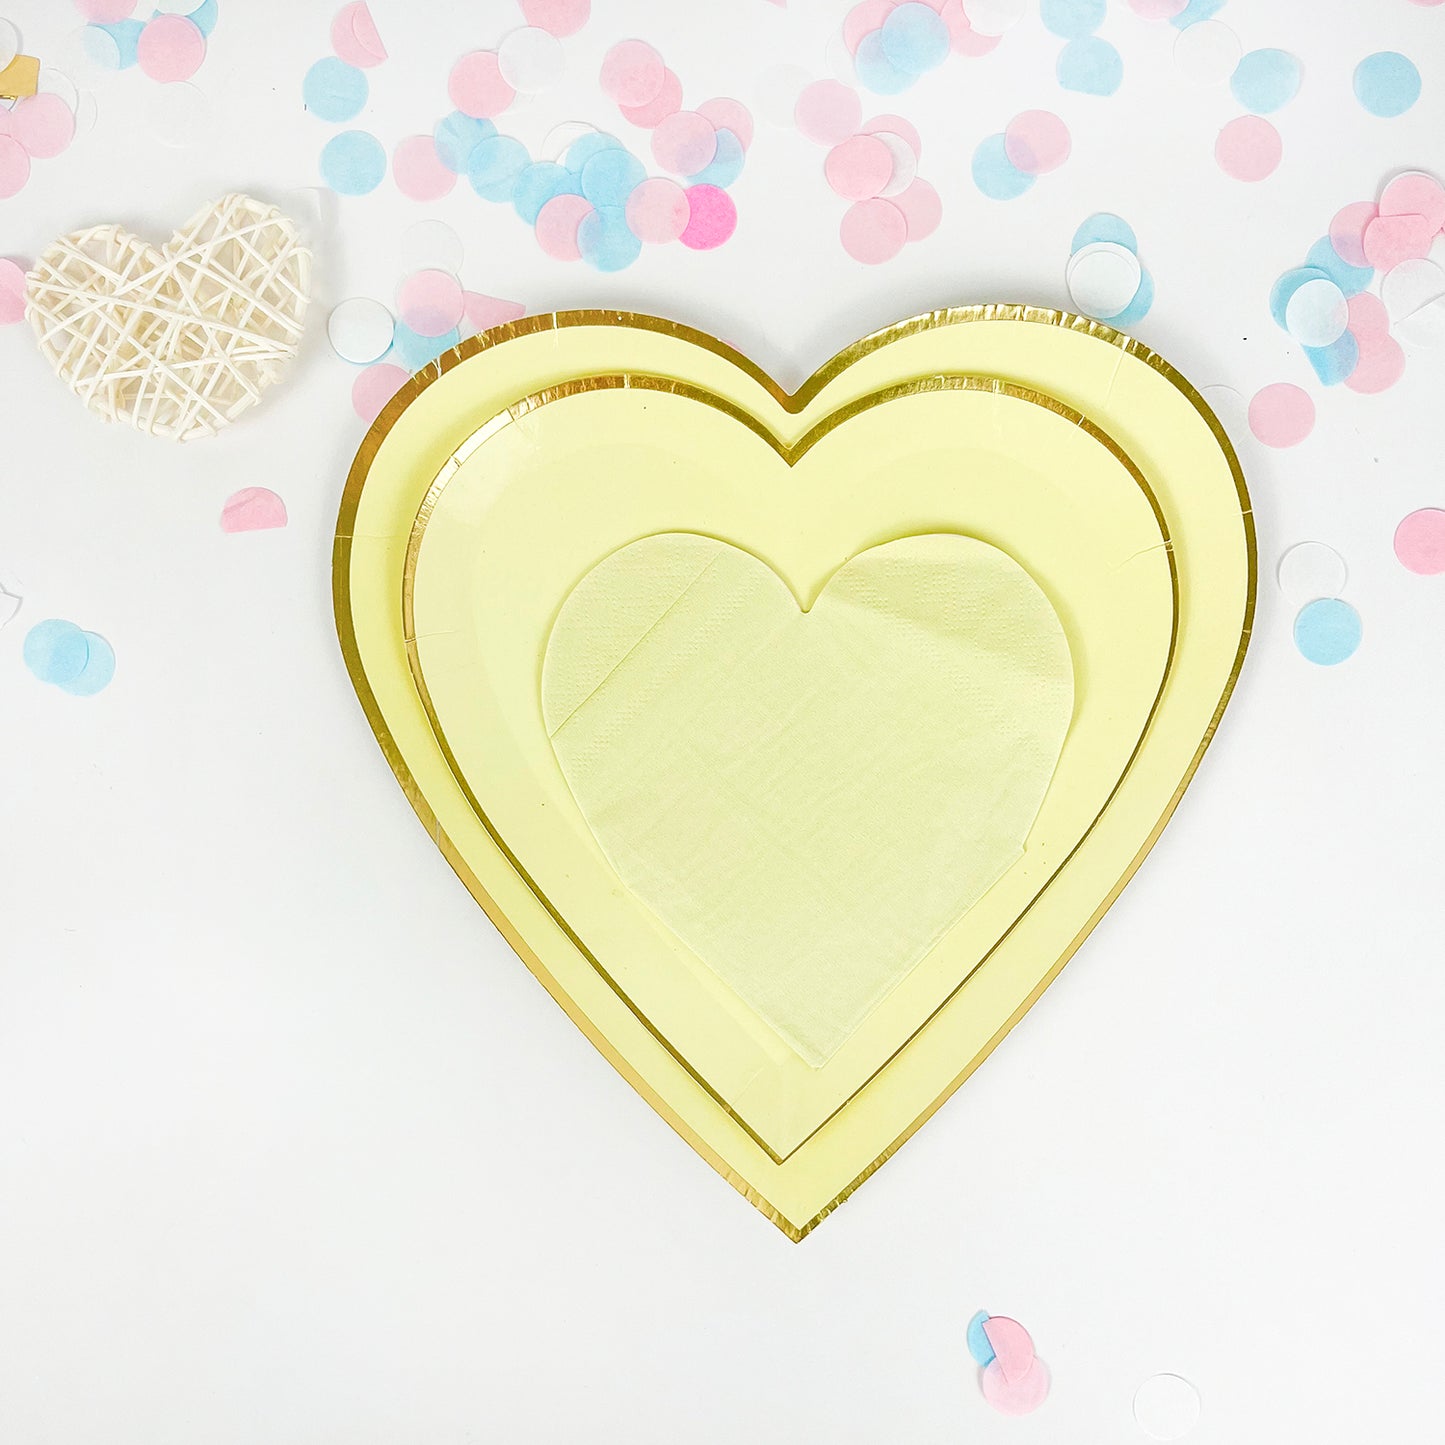 Colorful Heart Paper Plate With Golden Edge Paper Plate Event Party Supplies Paper Plates For Birthday Weddings Valentine